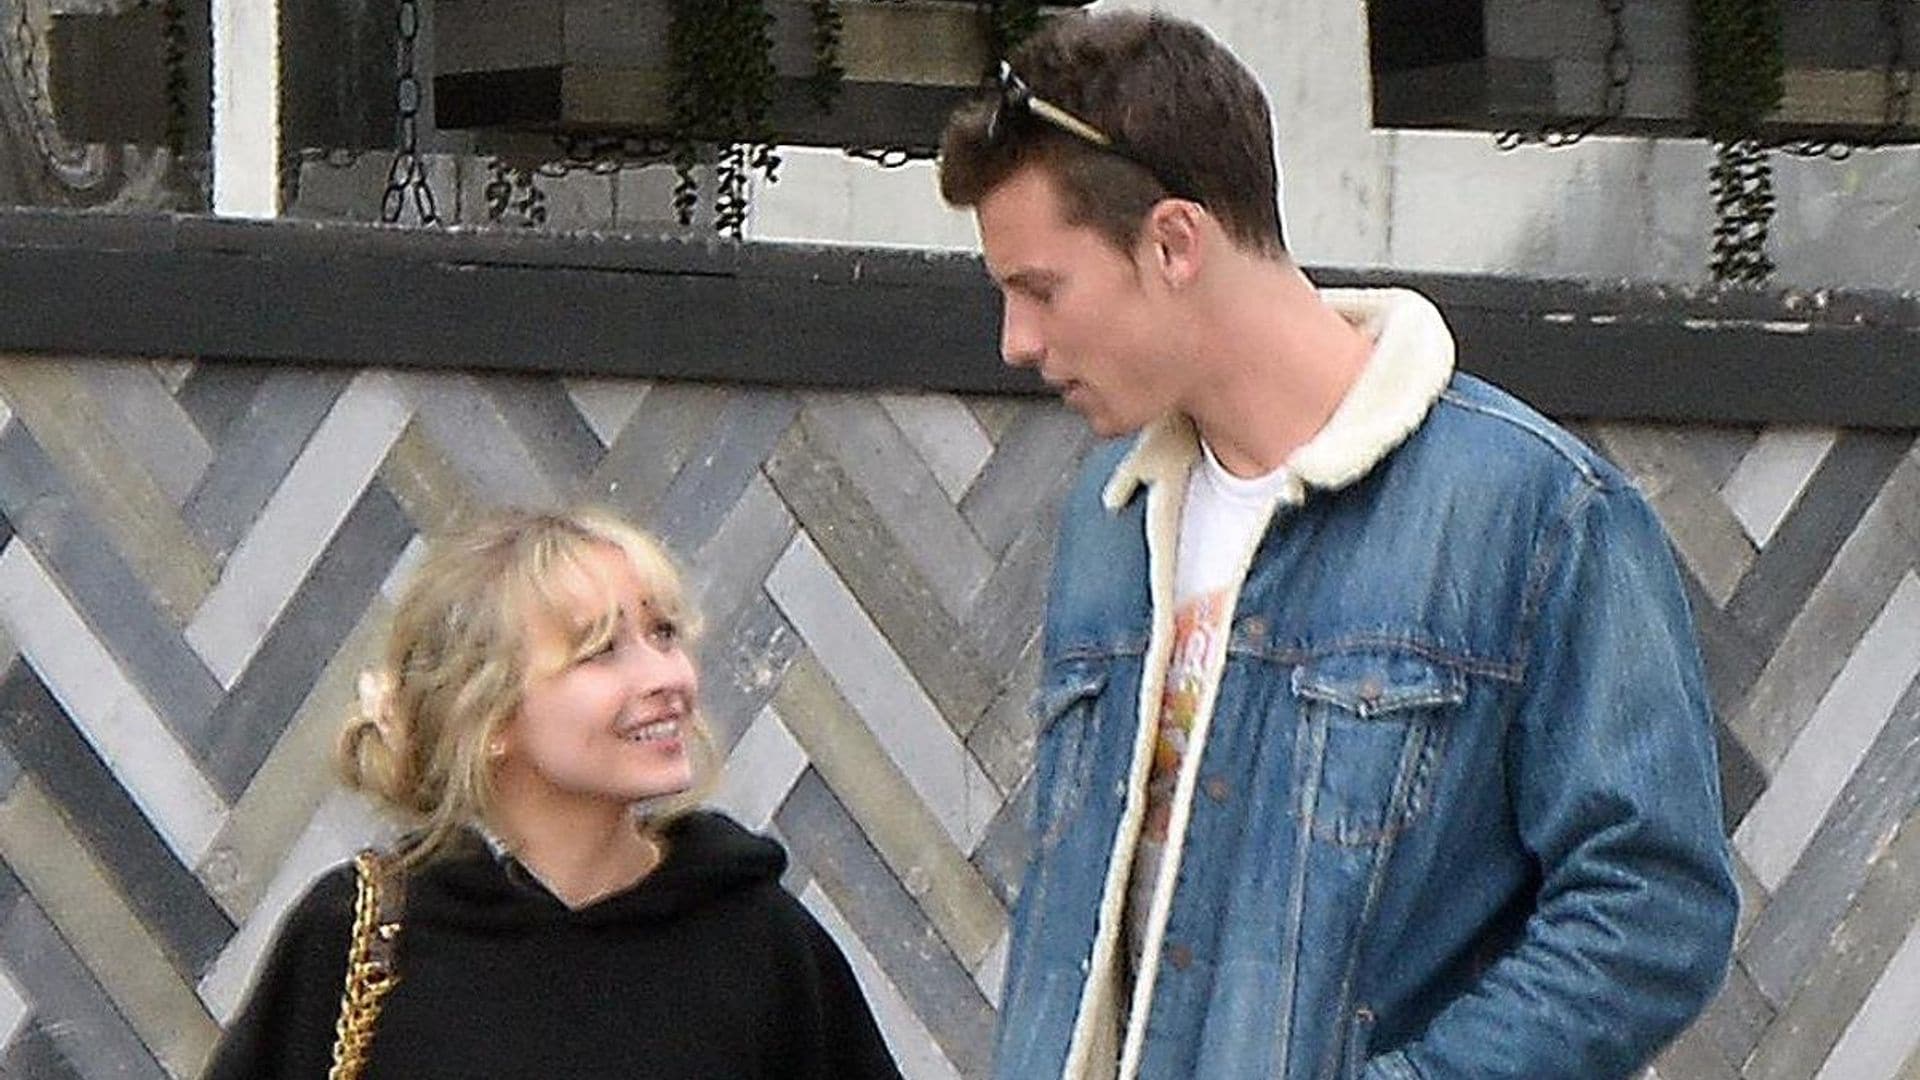 Is Shawn Mendes dating Sabrina Carpenter? The singers spend time together in Los Angeles